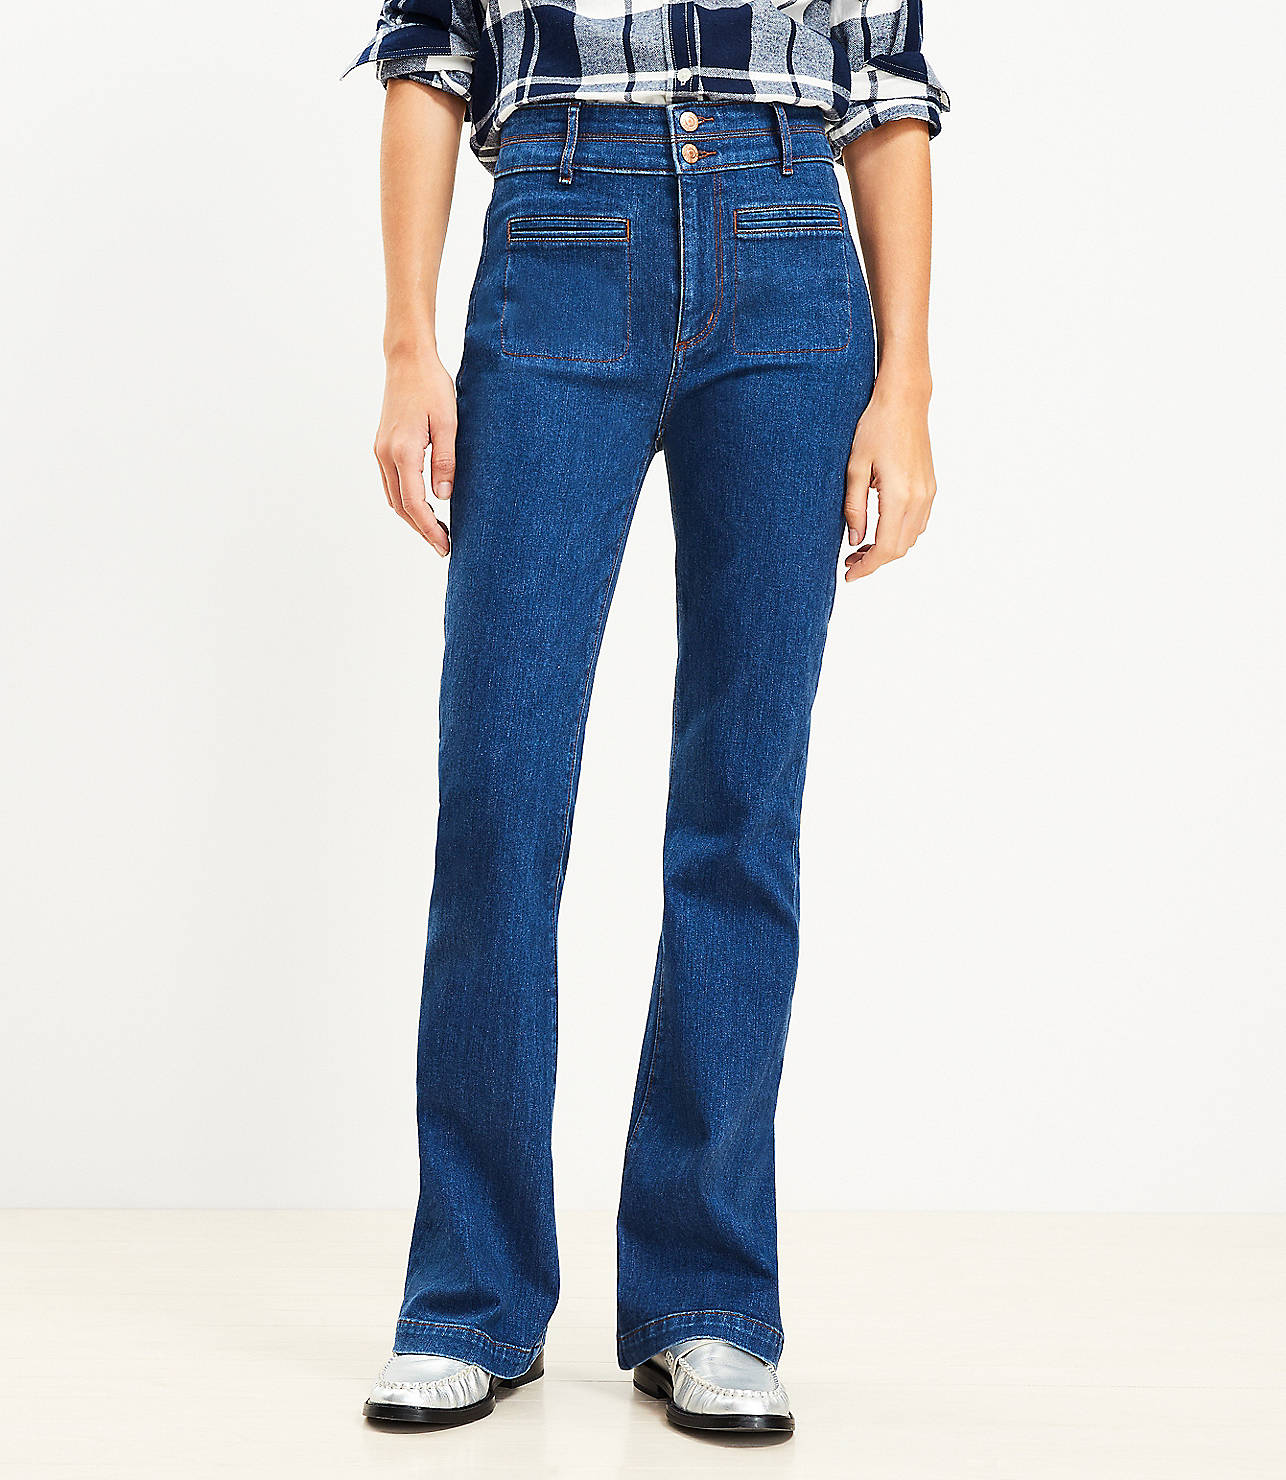 Petite High Rise Slim Flare Jeans in Rinse Wash